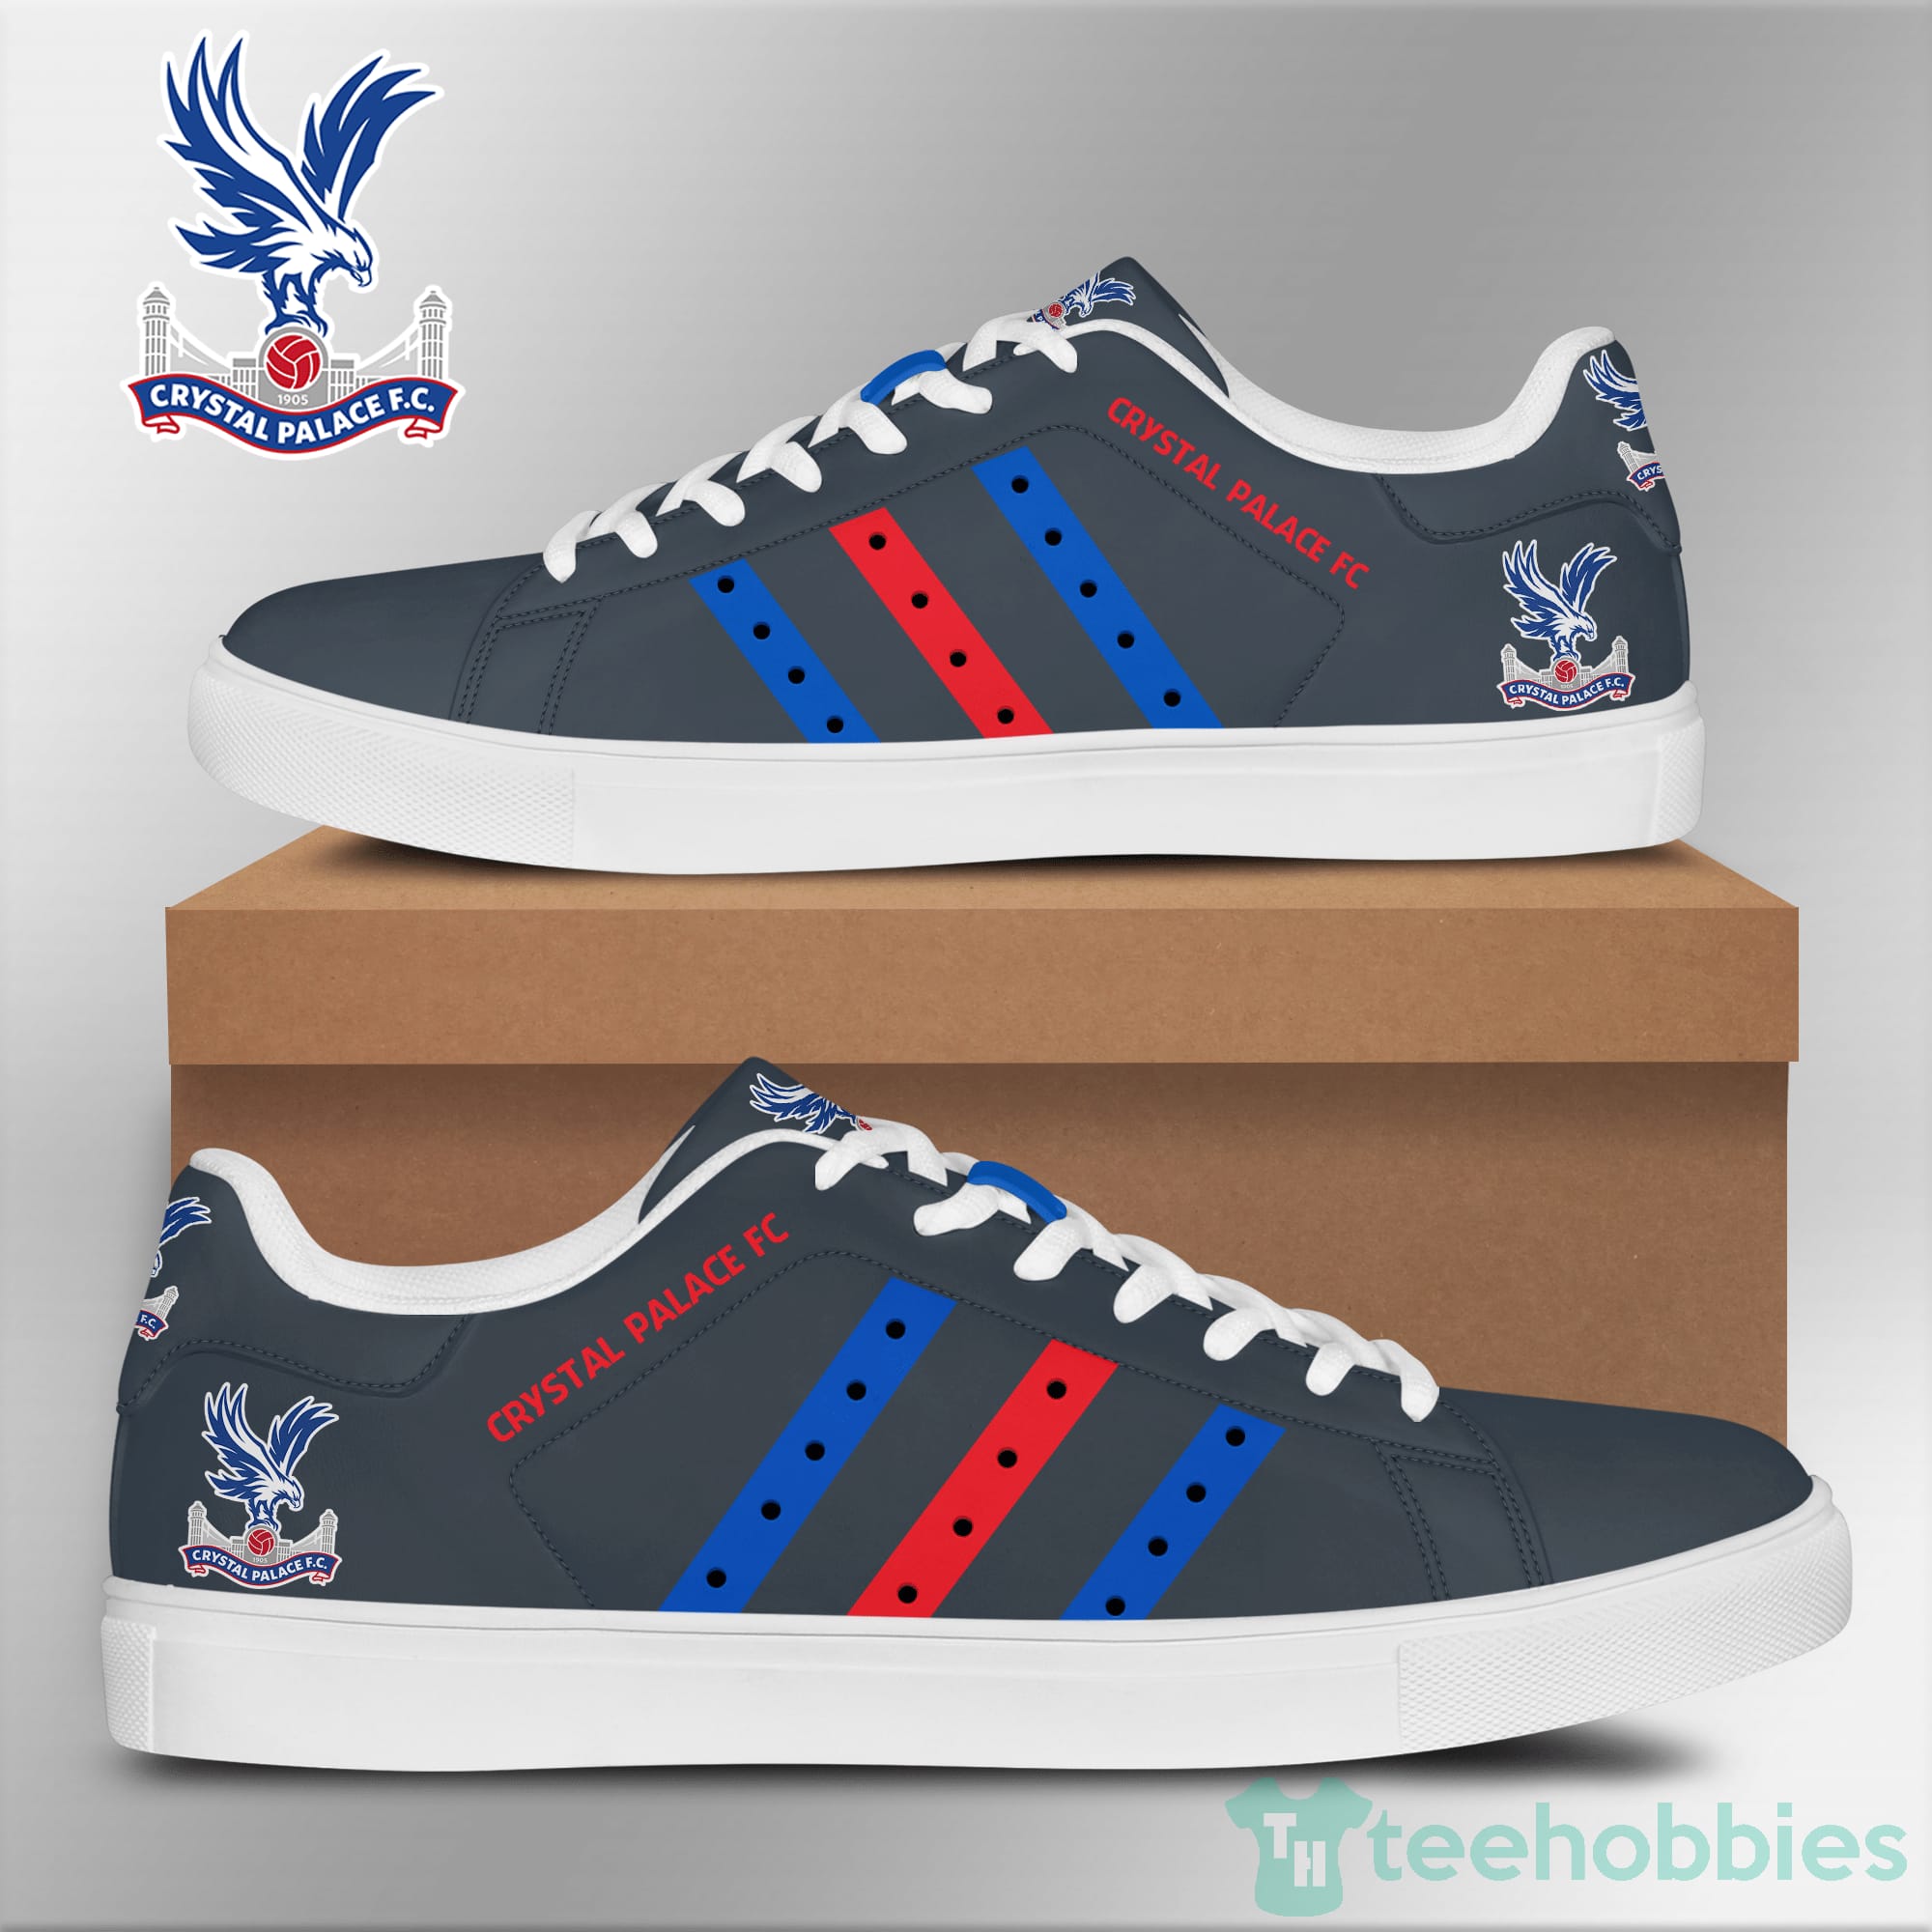 Crystal Palace Fc Grey Low Top Skate Shoes Product photo 1